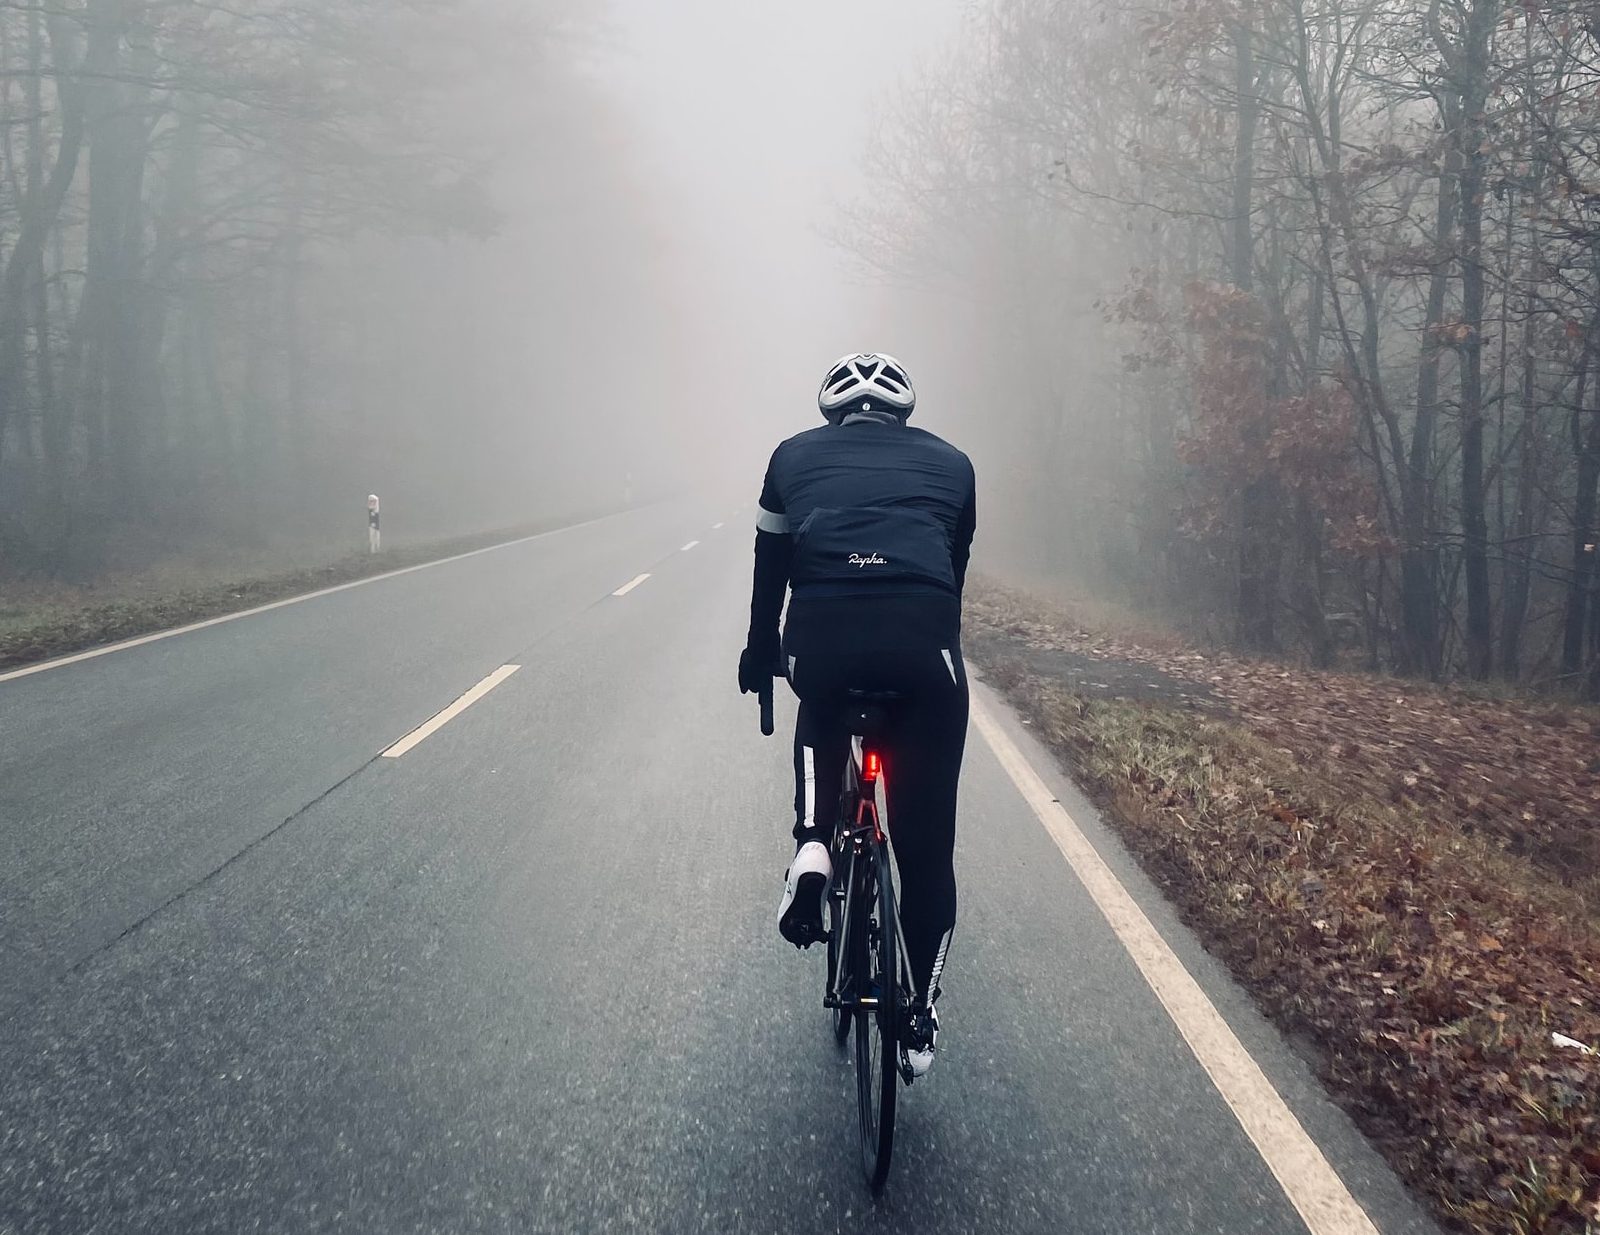 Cycling down a road; photo by Luca Jonas on Unsplash